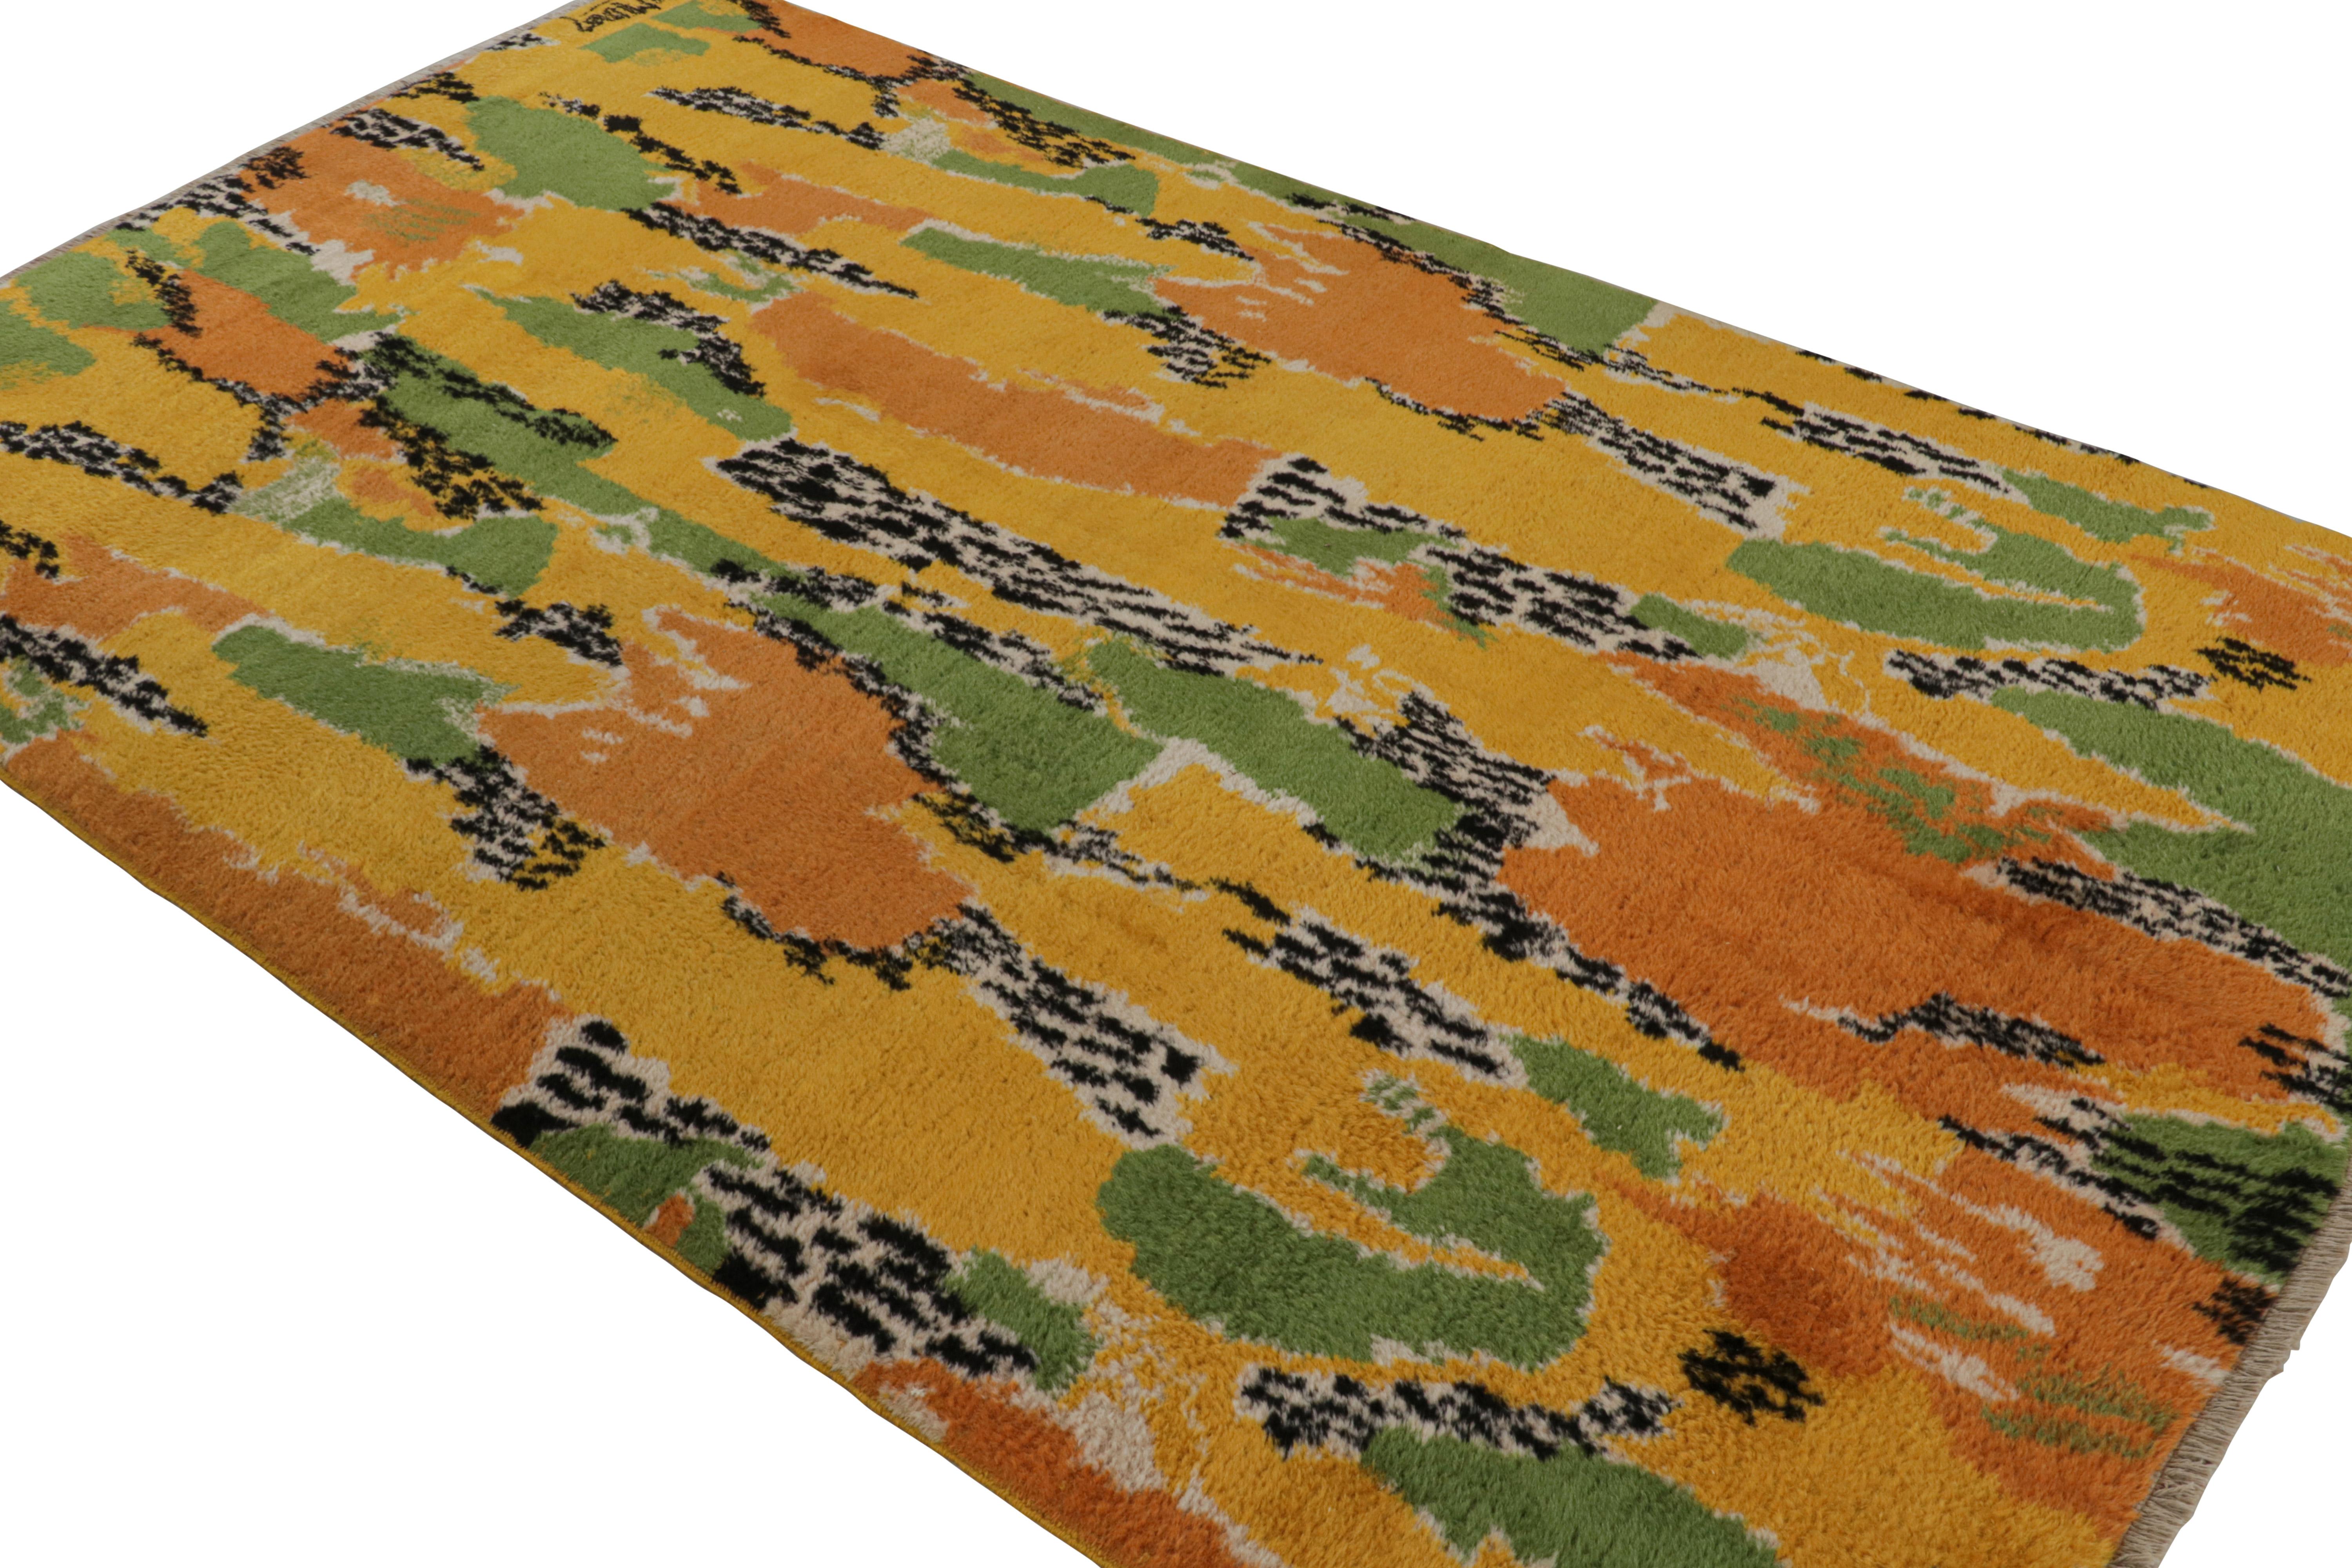 Hand-knotted in wool circa 1960-1970, this 5x9 vintage Art Deco rug is a rare signed piece by Zeki Müren. The artist’s signature is in the lower left corner, and a second signature reads “Leopar” in the upper left (Muren’s name for this series,